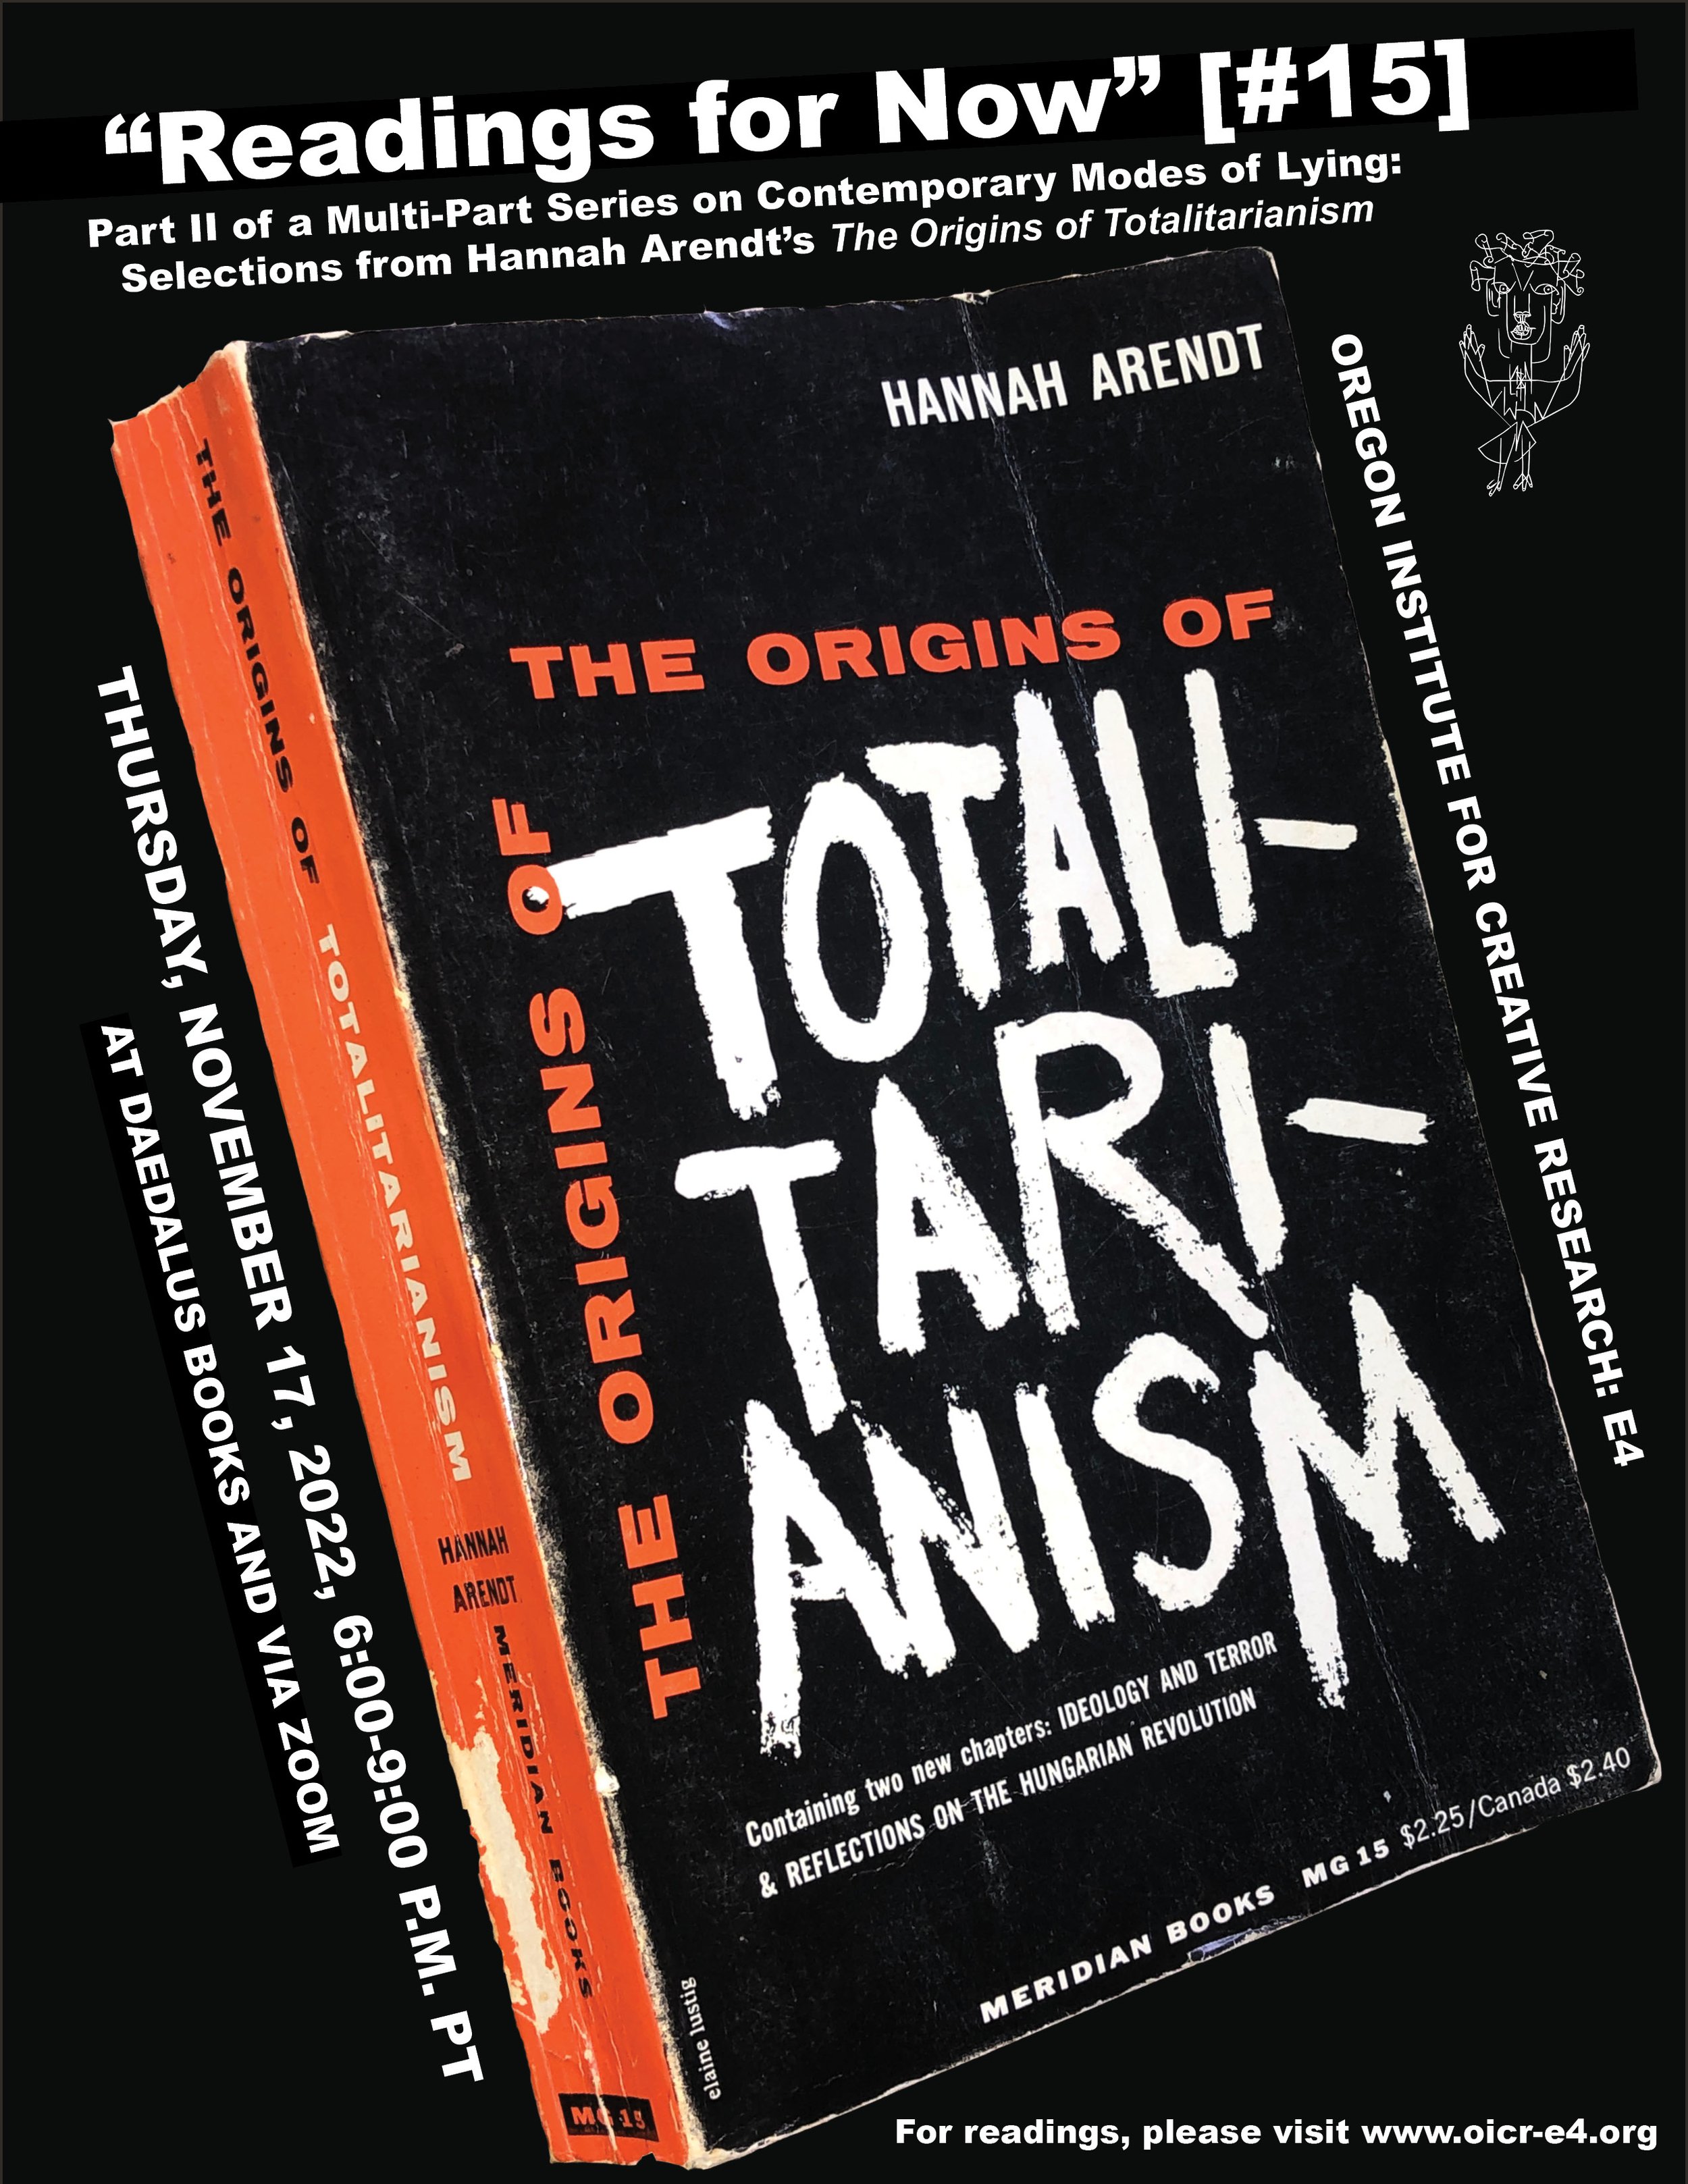 #15: Selections from Hannah Arendt's "The Origins of Totalitarianism" (Part II of a Multi-Part Series on Contemporary Modes of Lying)